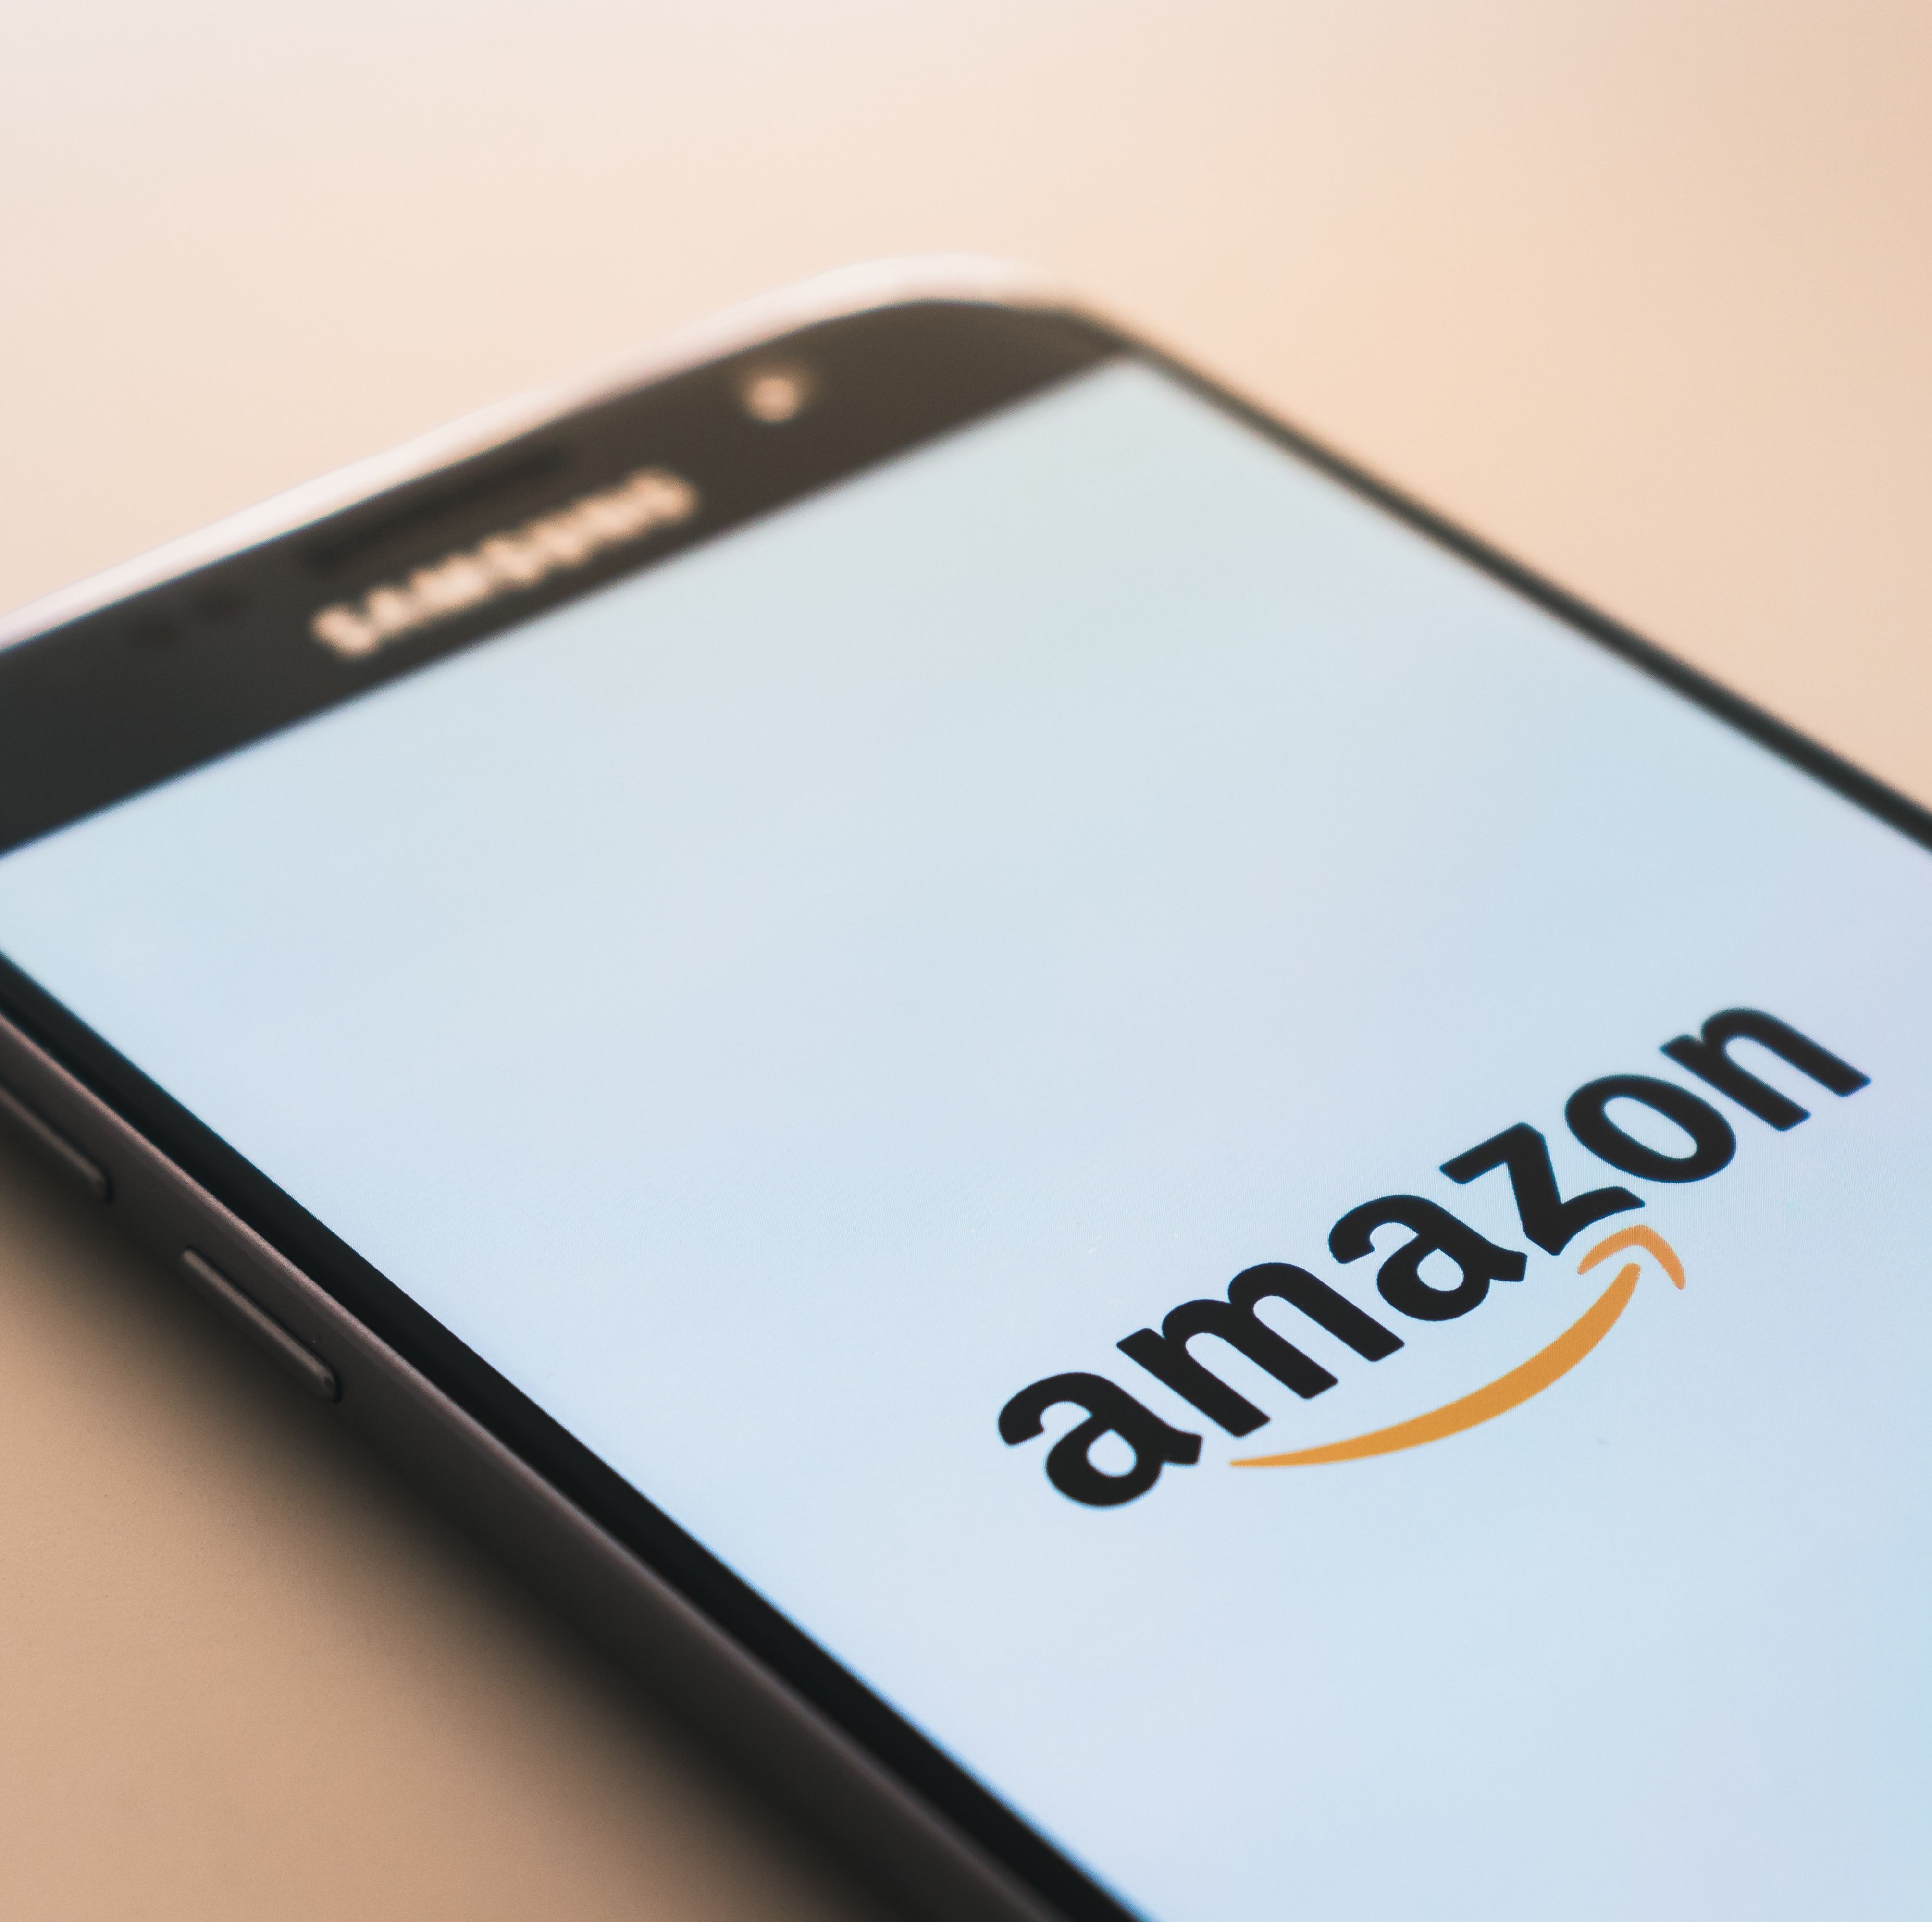 ICYMI Amazon Has a Secret Coupon Page Filled With Amazing Deals